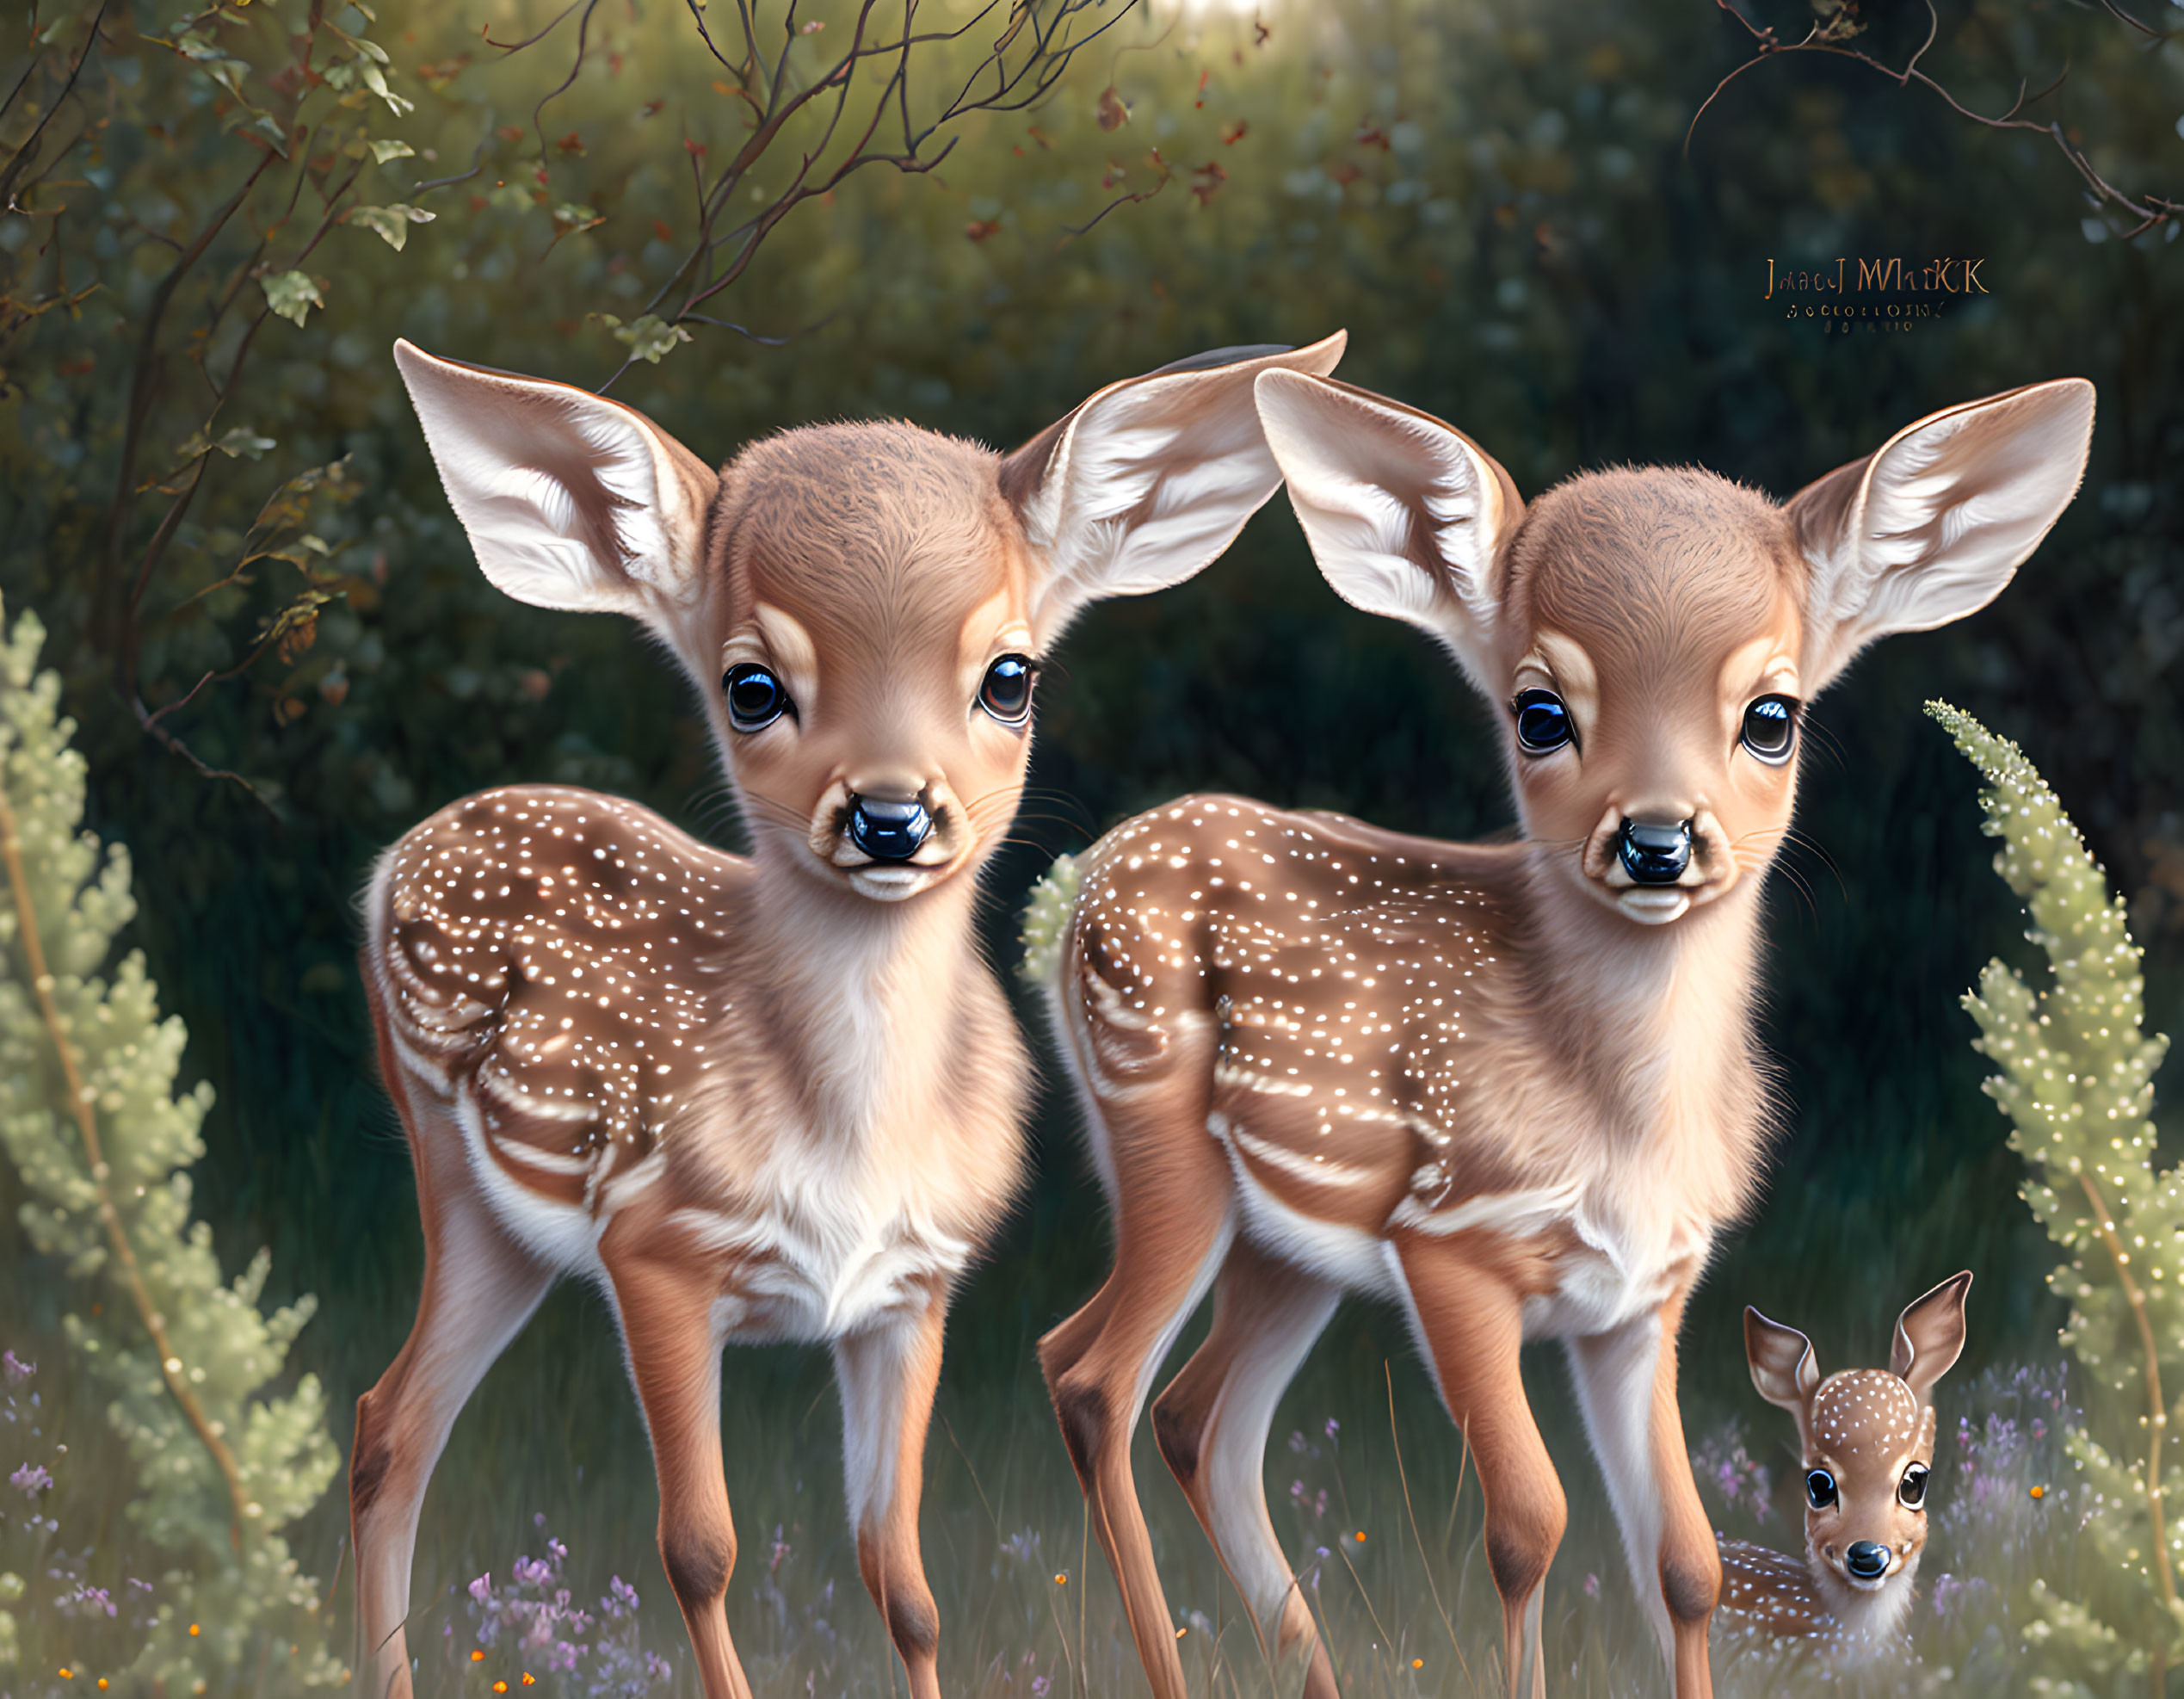 Three cute fawns in lush greenery with big eyes and spotted coats.